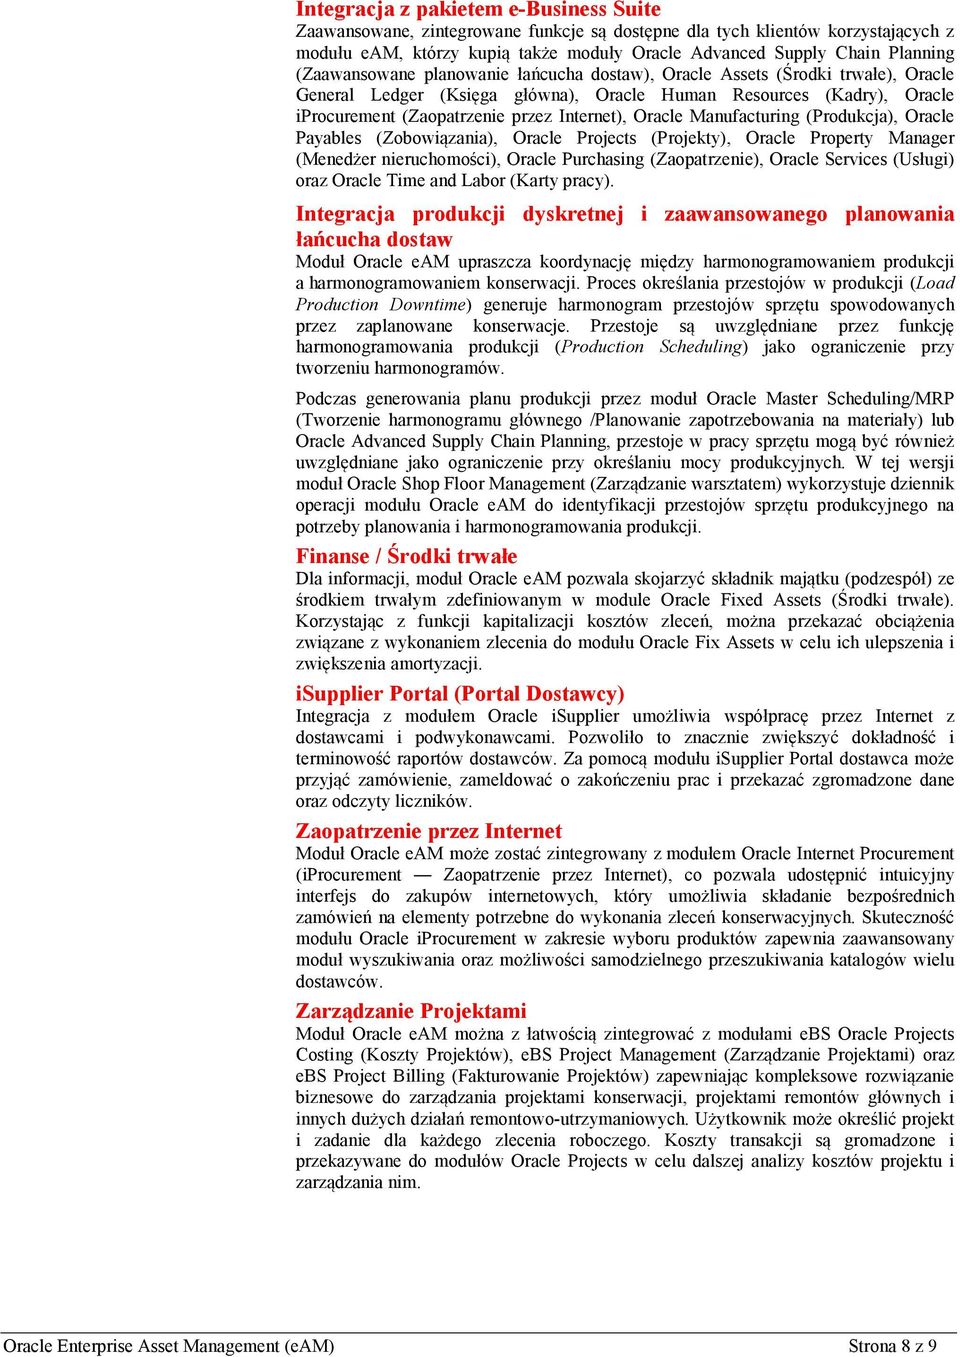 Oracle Manufacturing (Produkcja), Oracle Payables (Zobowiązania), Oracle Projects (Projekty), Oracle Property Manager (Menedżer nieruchomości), Oracle Purchasing (Zaopatrzenie), Oracle Services